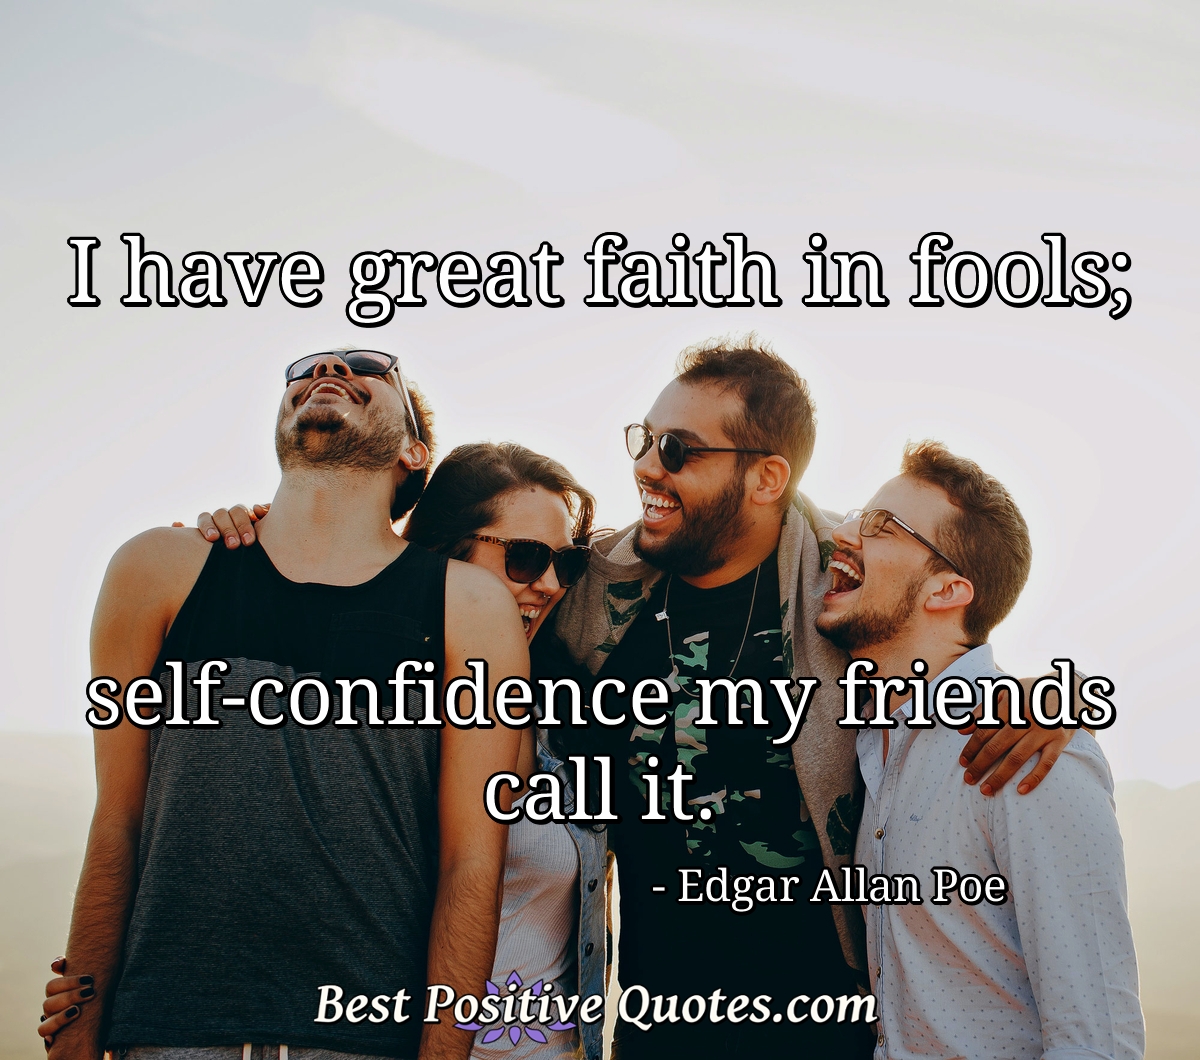 I have great faith in fools; self-confidence my friends call it. - Edgar Allan Poe